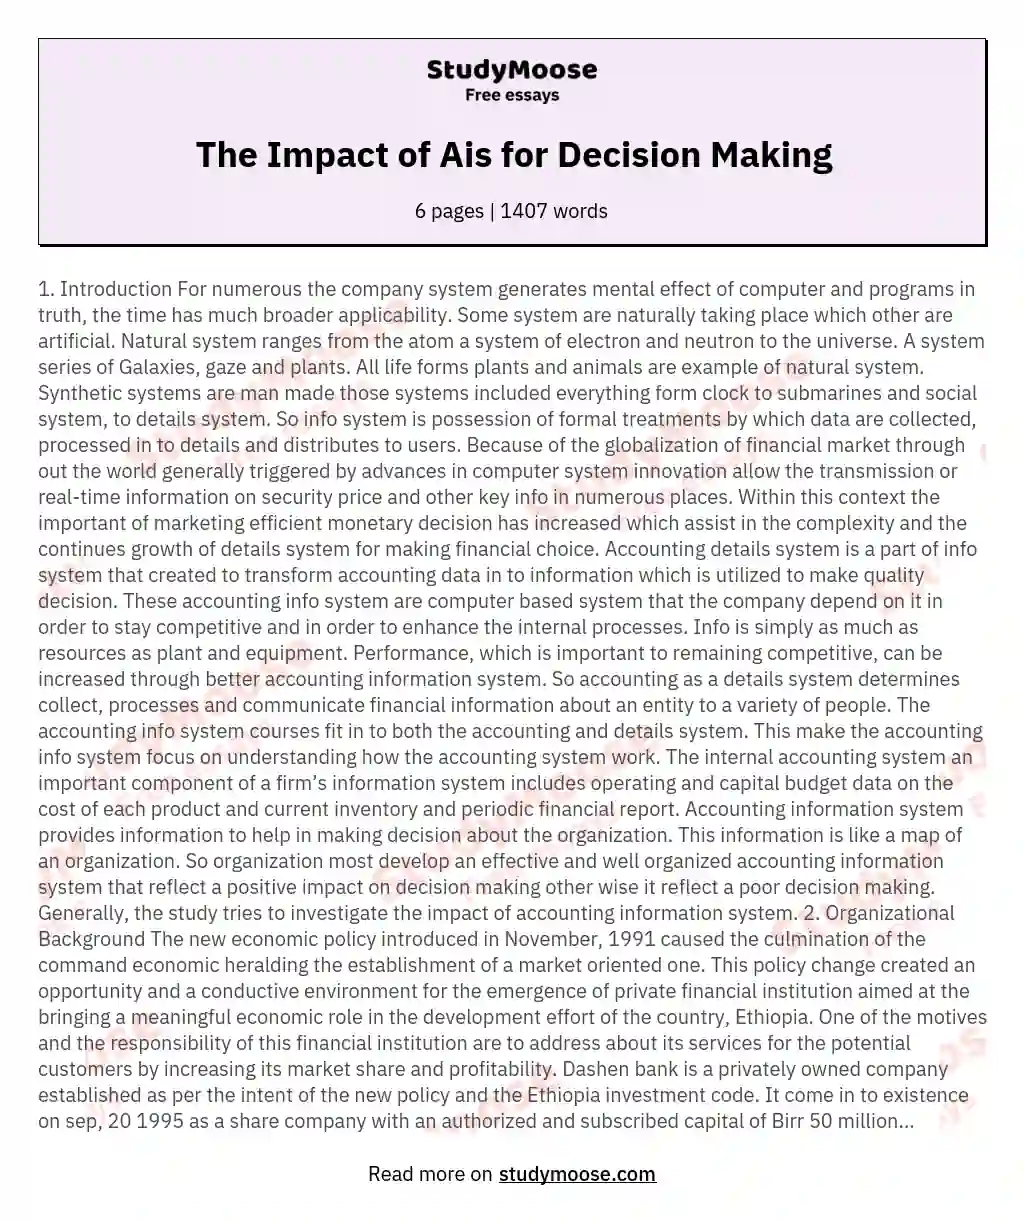 The Impact of Ais for Decision Making essay